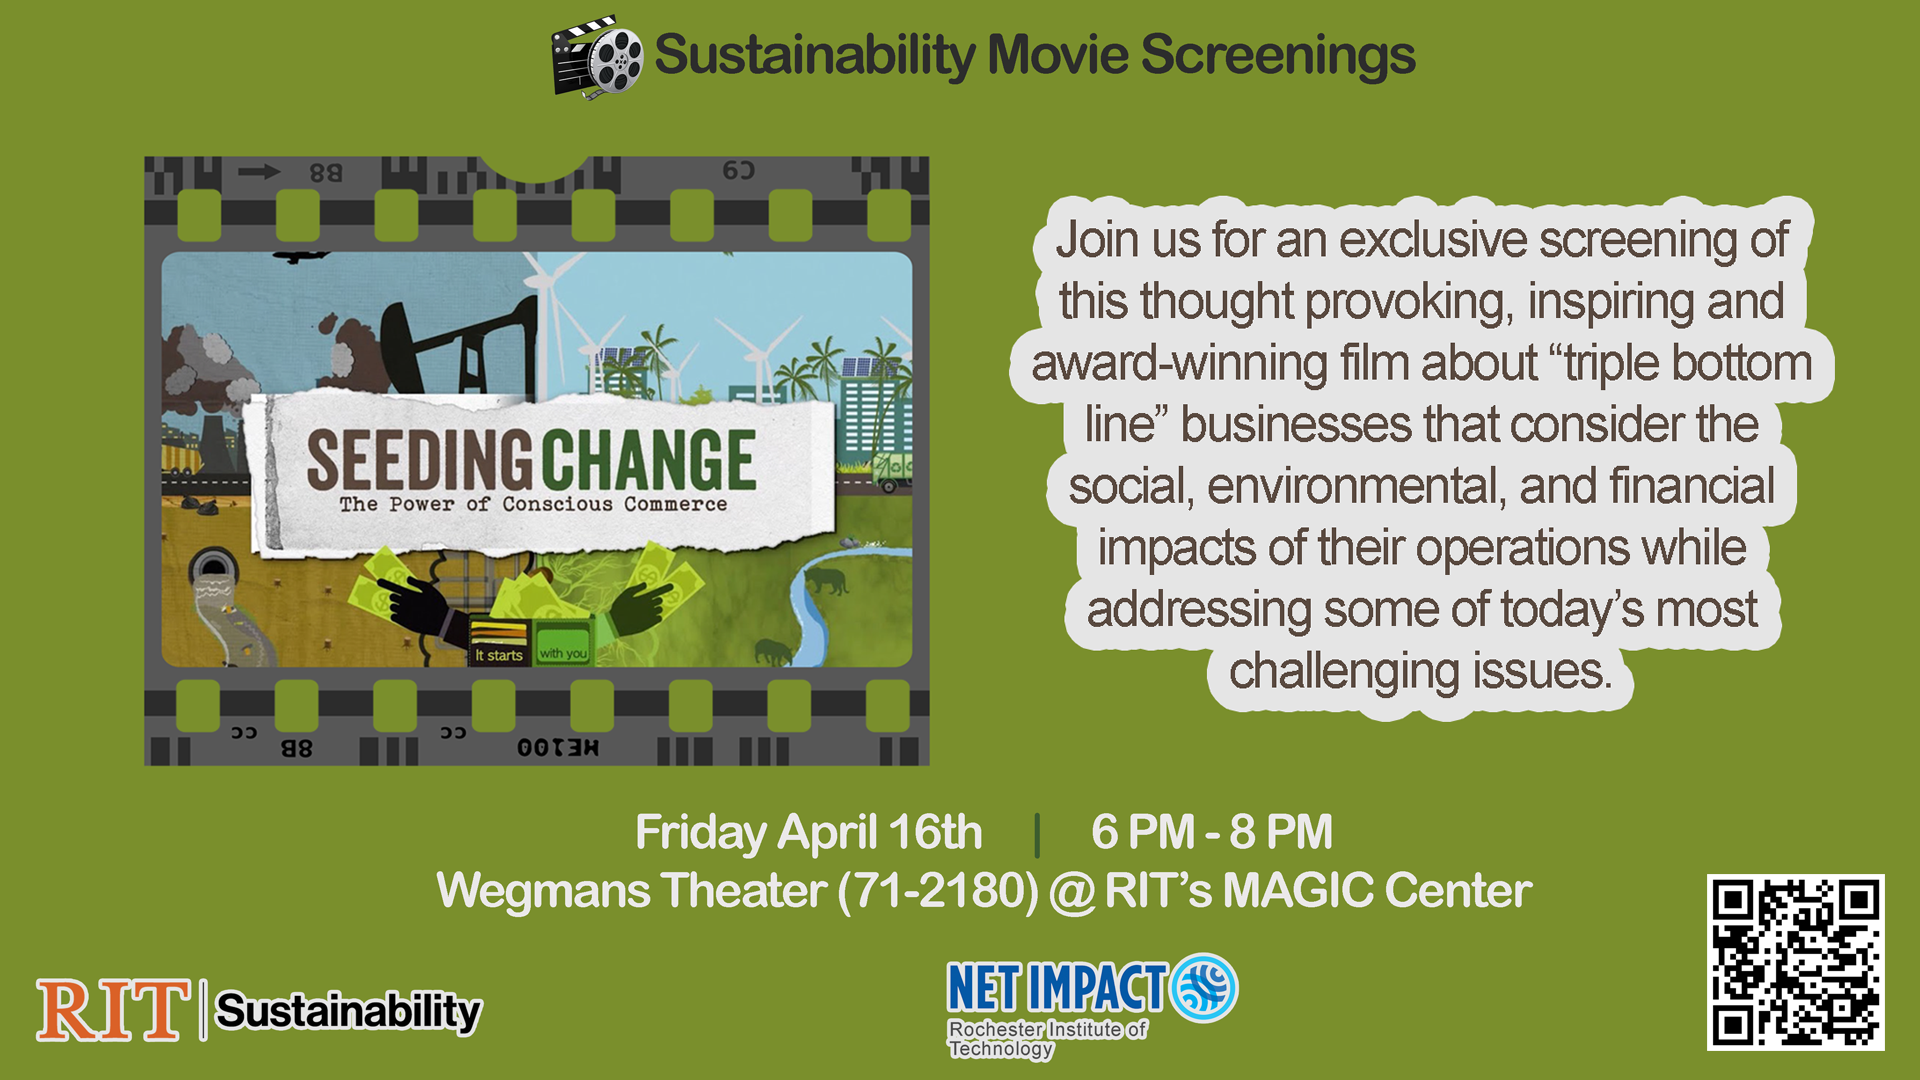 The movie promotional image is shown along with the Event Description, date, time, location, registration QR codes, and the logos for RIT Sustainability and Net Impact RIT. 